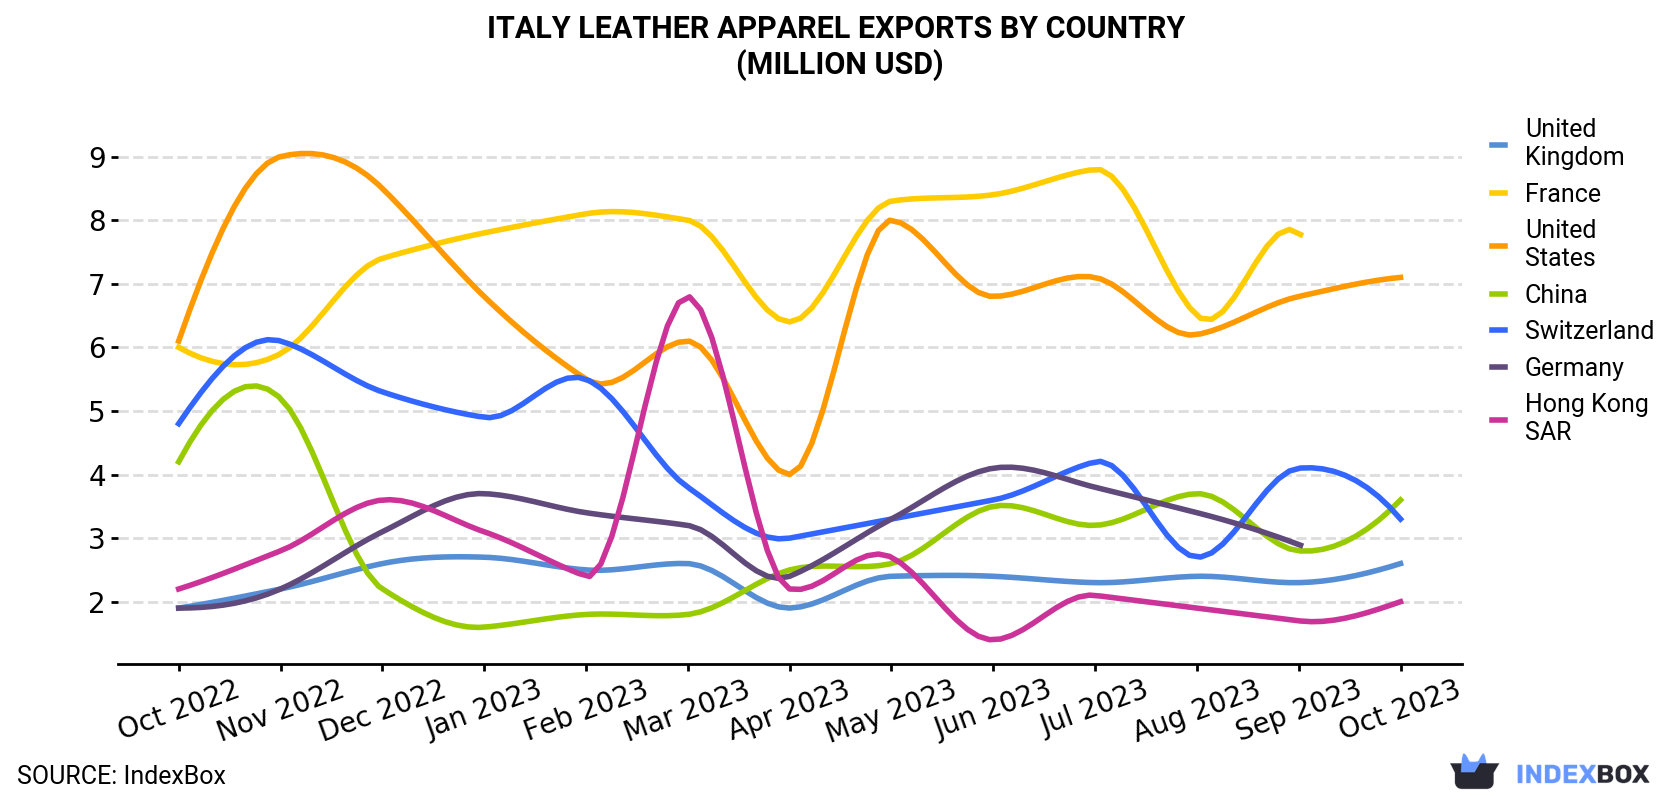 Italy Leather Apparel Exports By Country (Million USD)